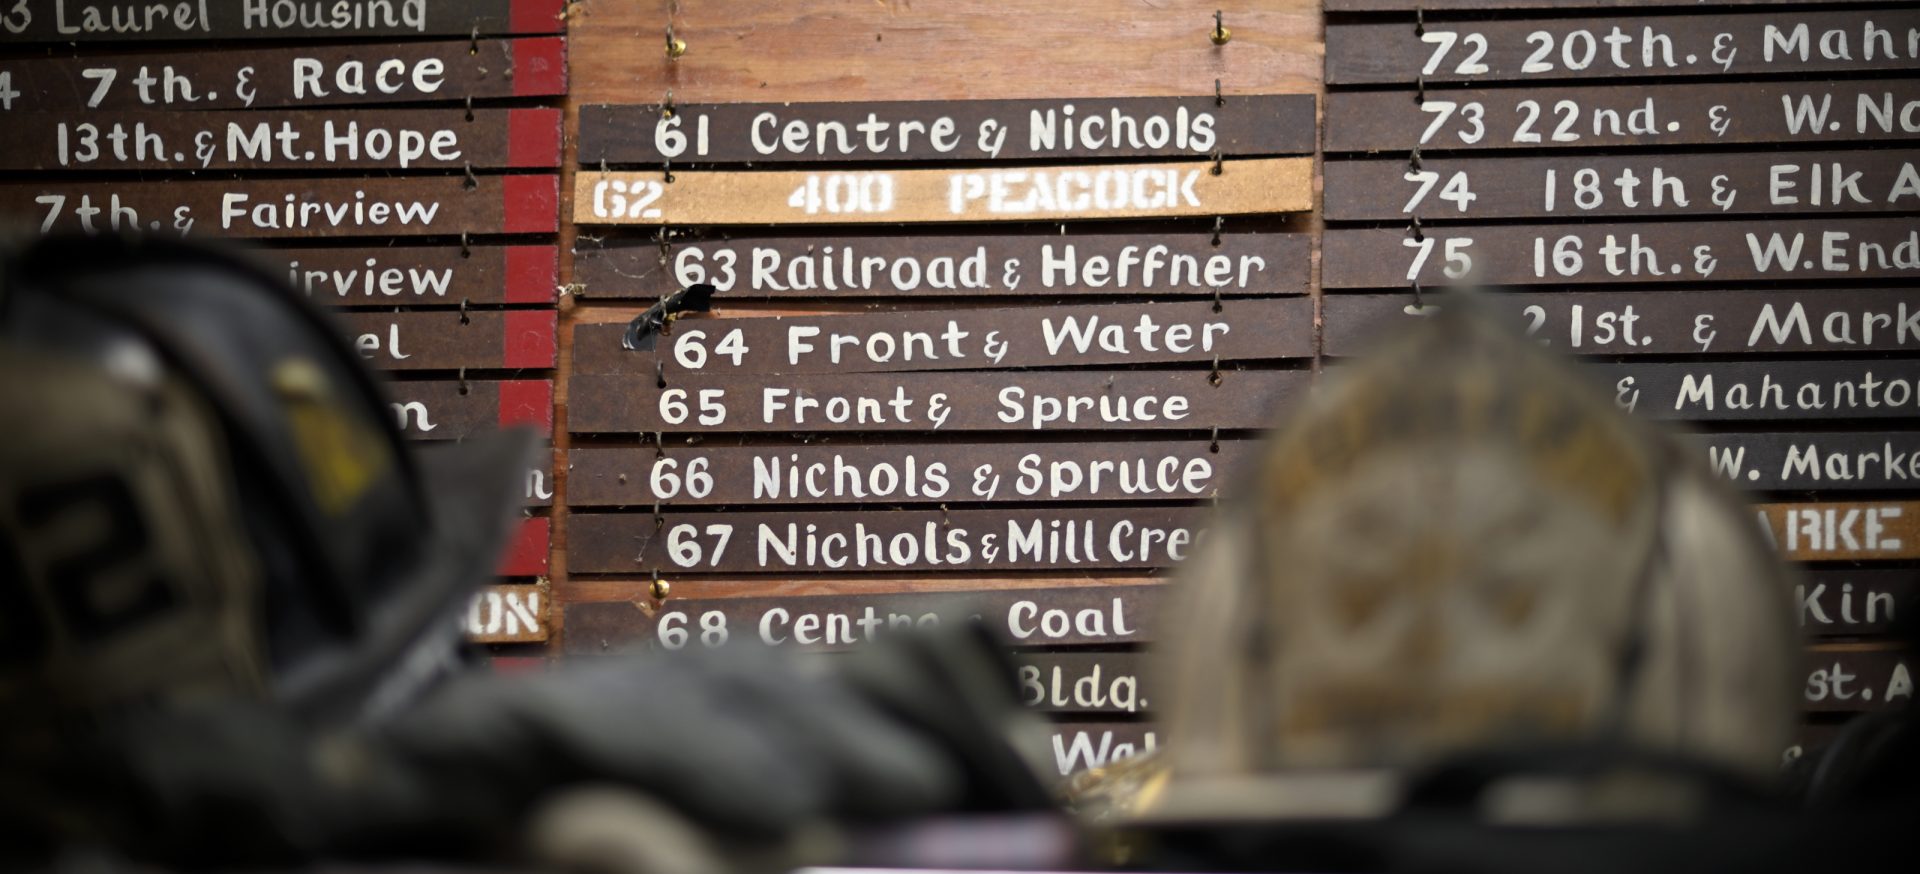 Firefighters gear and call box locations at the fire house of the Humane Fire Co., in Pottsville, PA, on December 15, 2019.